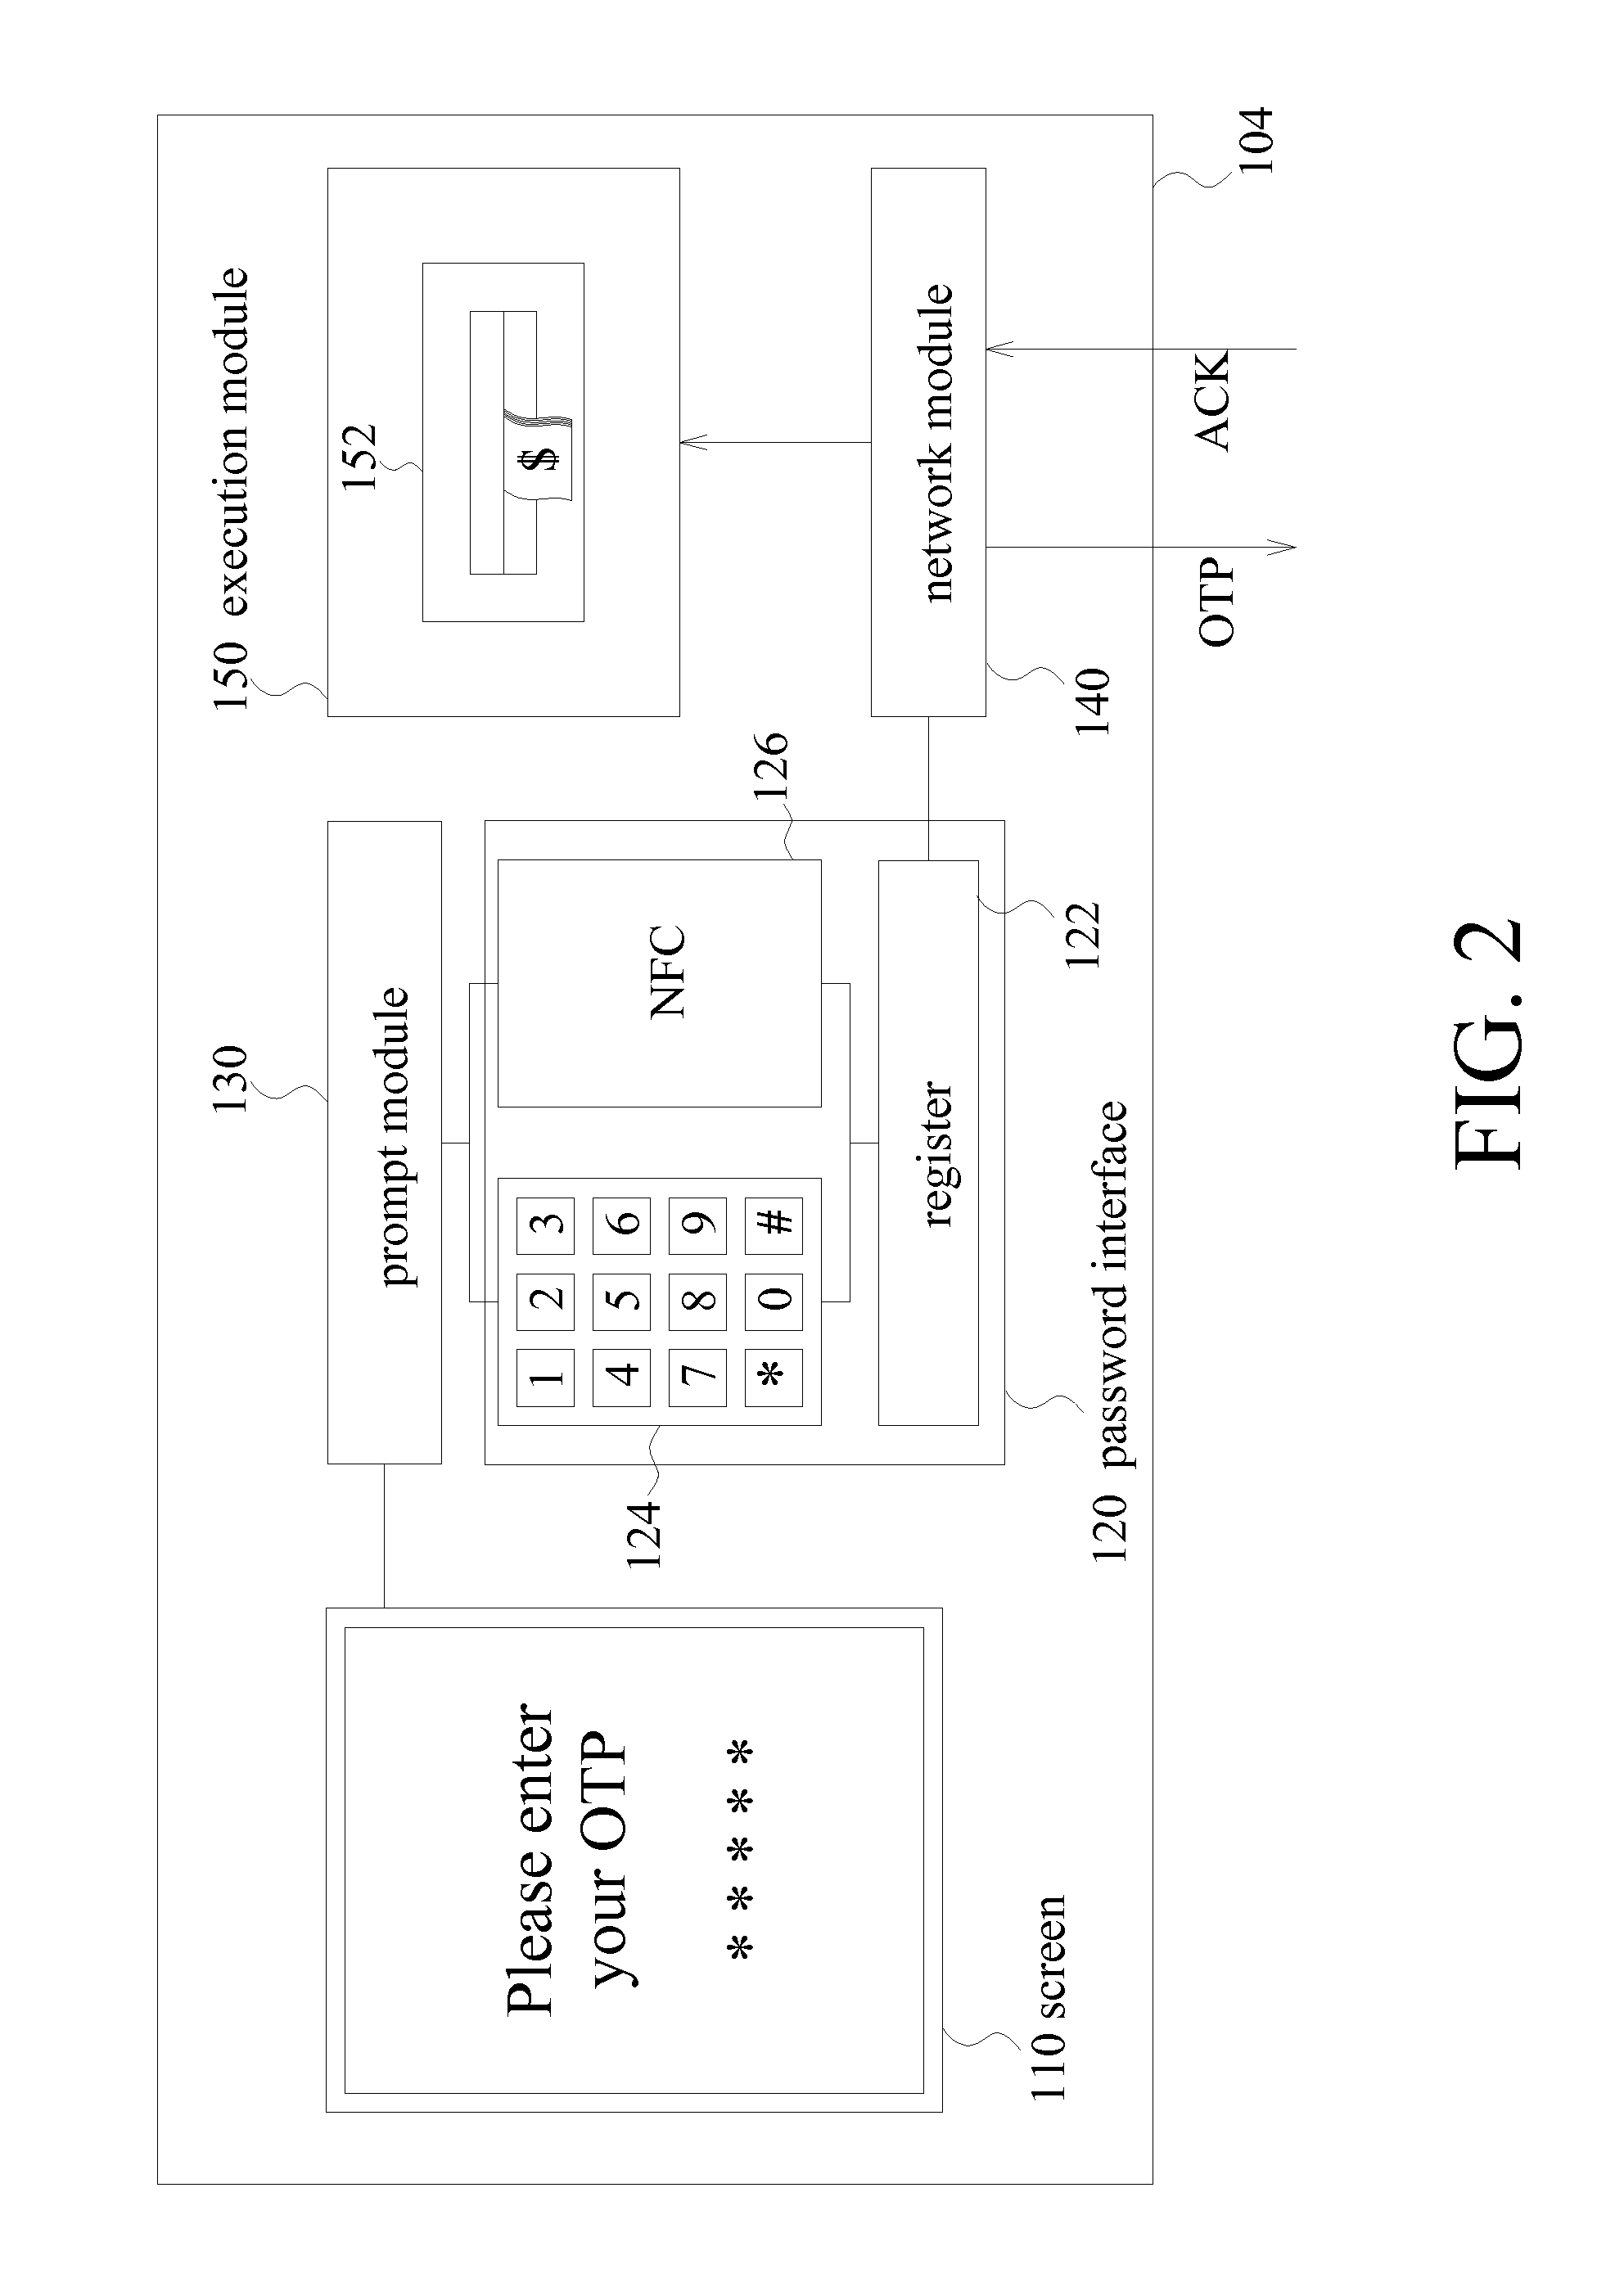 Financial transaction system, automated teller machine (ATM), and method for operating an ATM